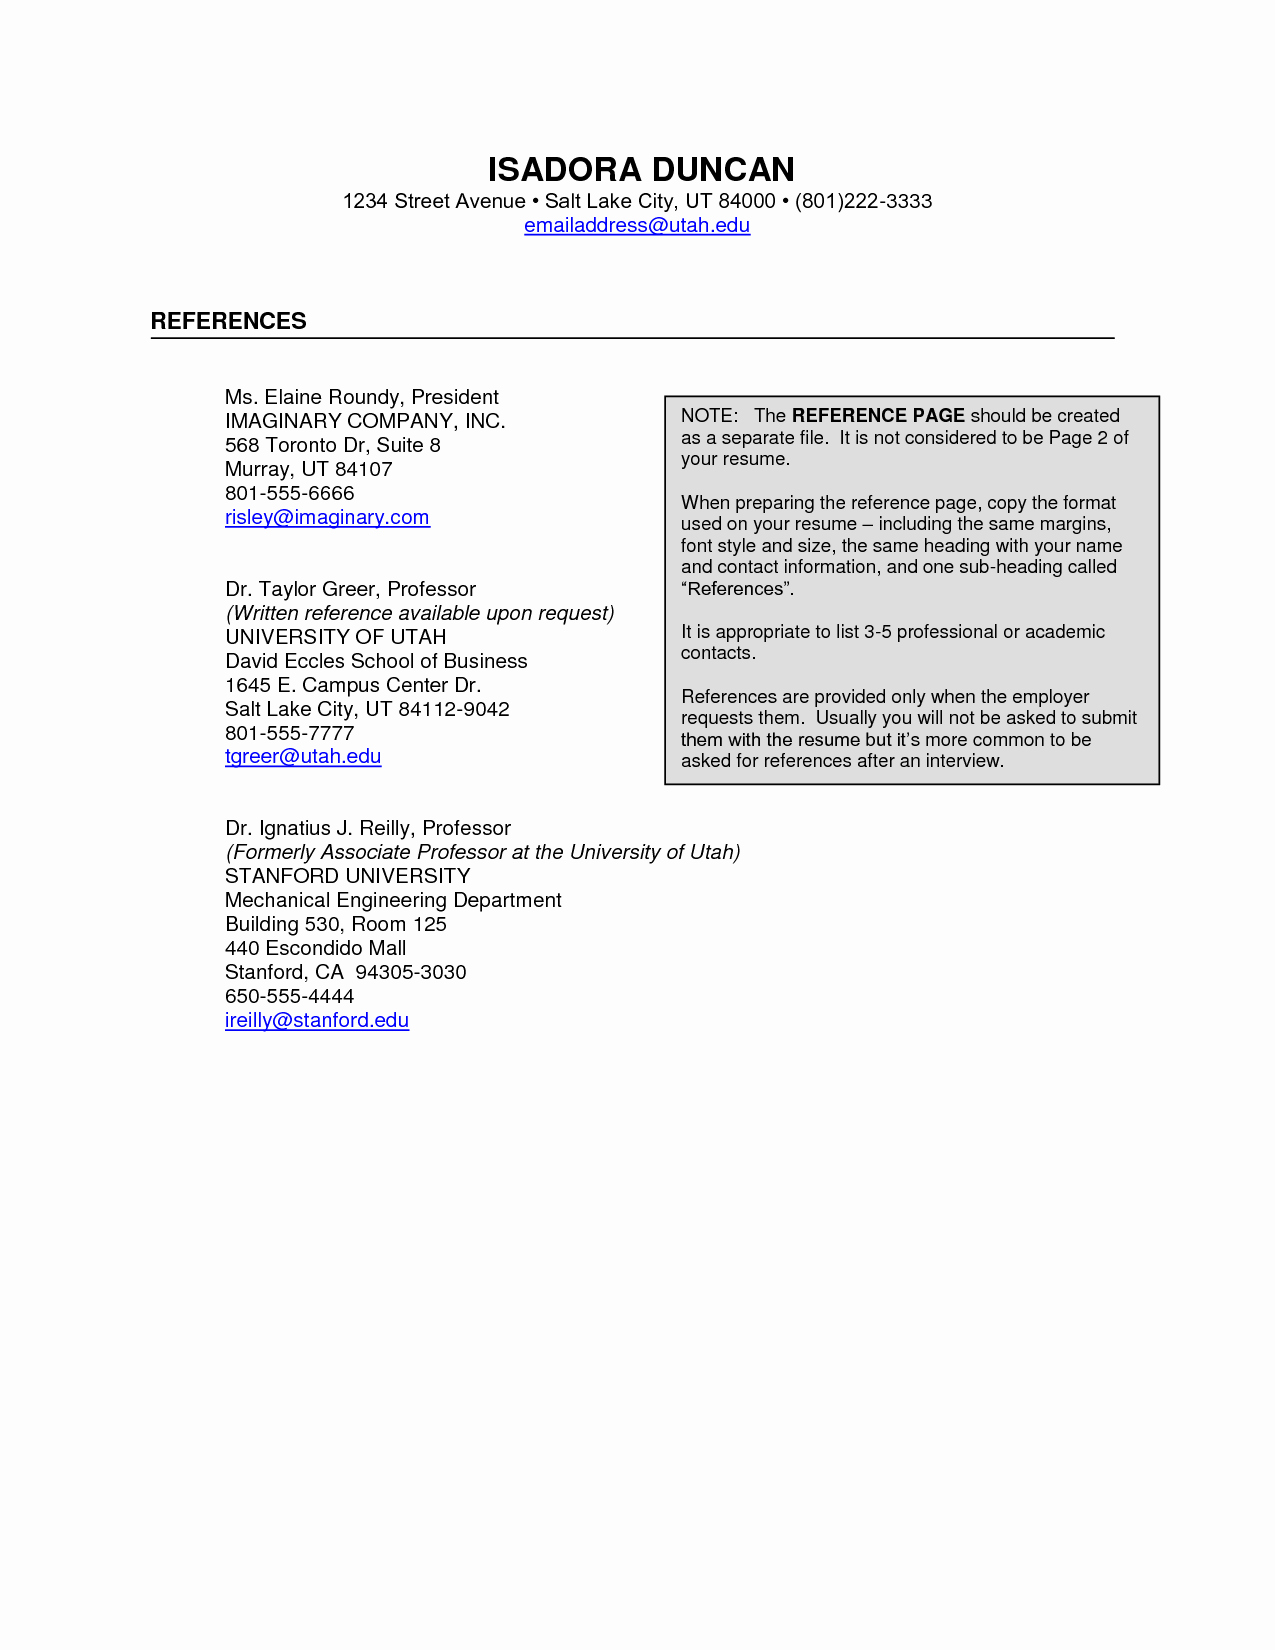 List Of Personal References Template Fresh Resume Professional References Resume Ideas